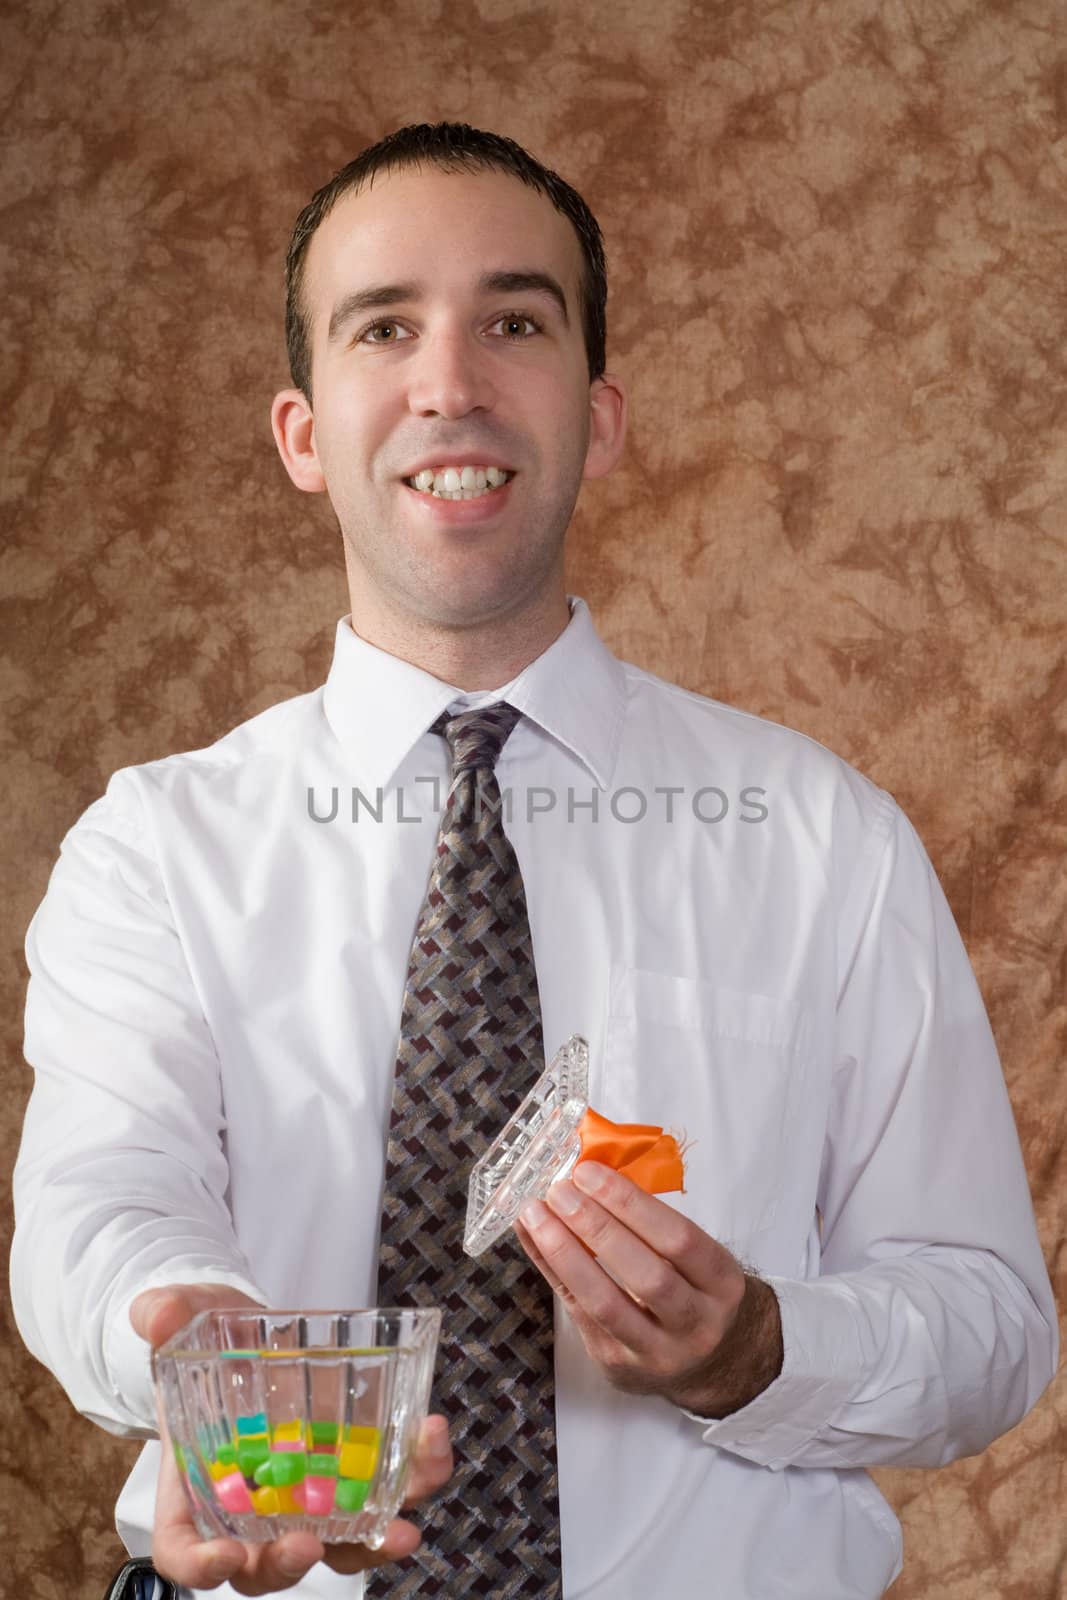 A young businessman offering some candy from a glass dish